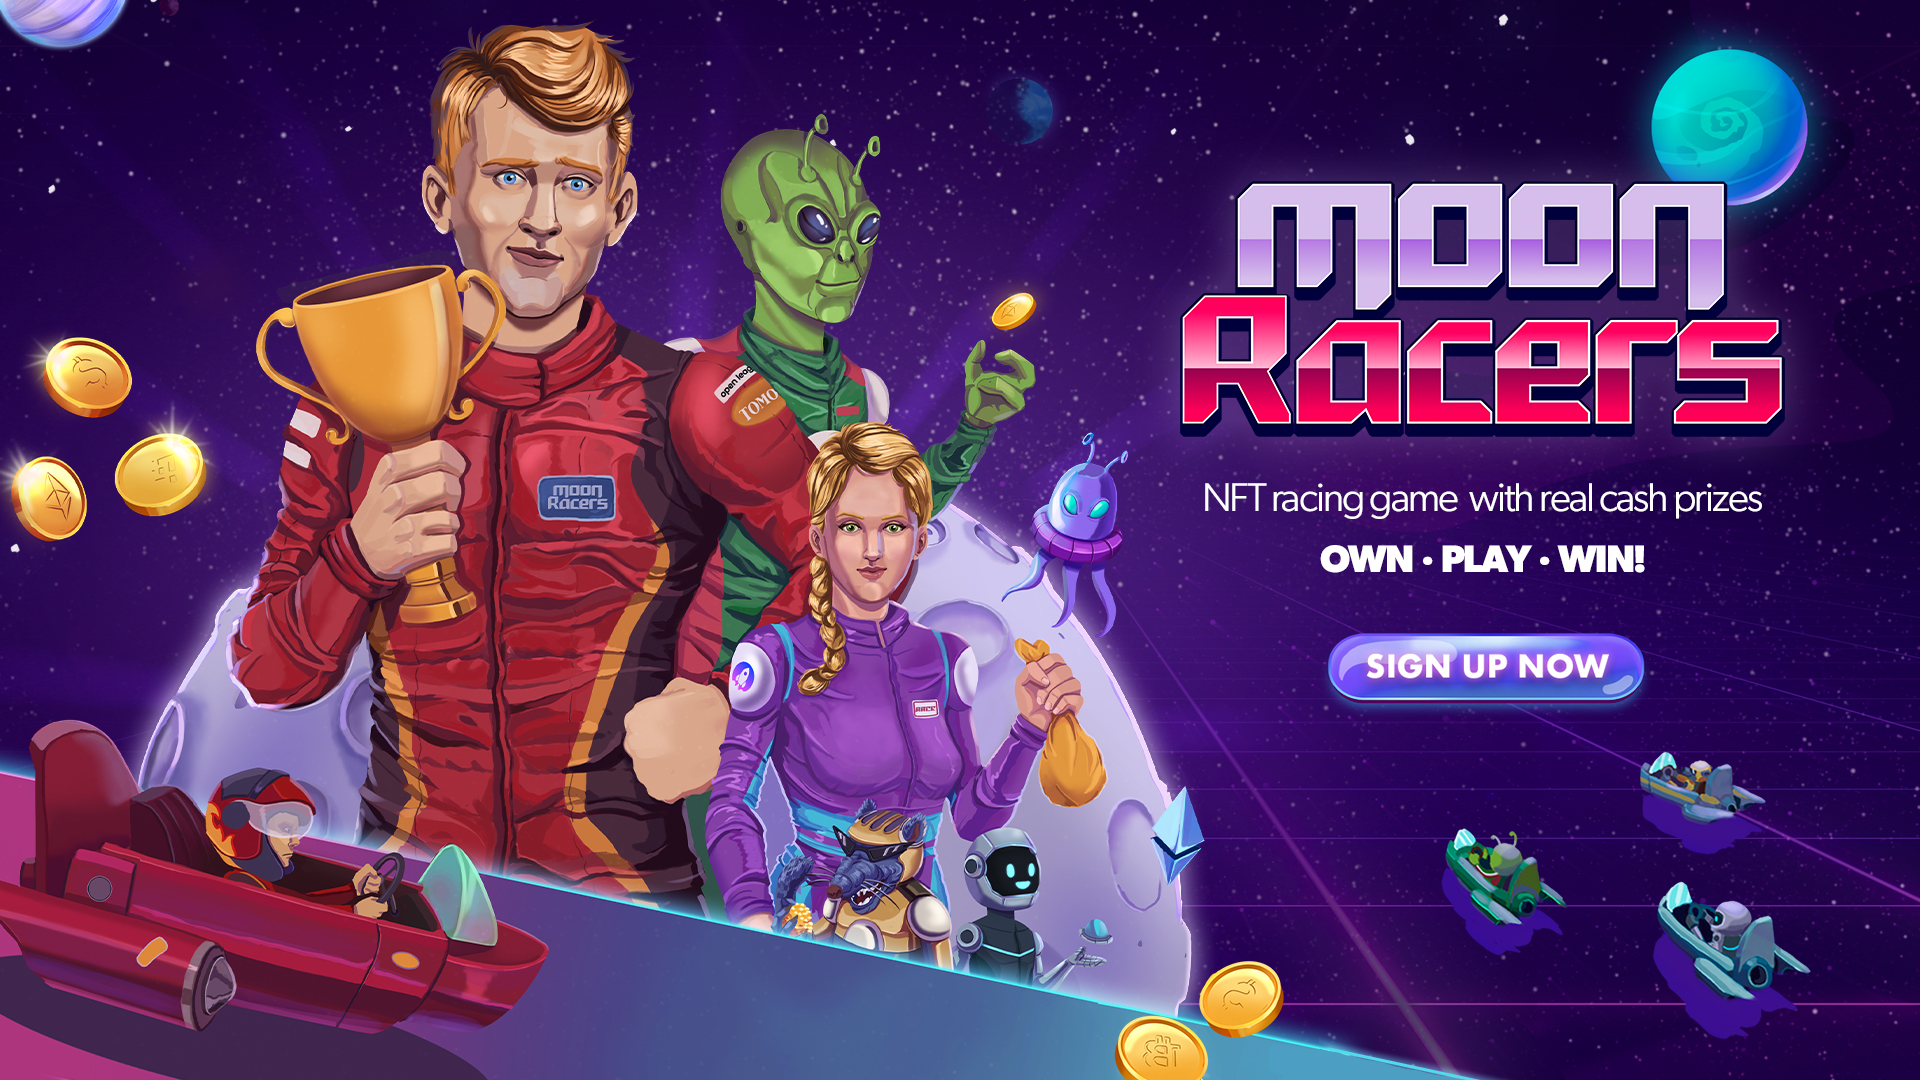 ~ NFT racing game with real cash prizes
OWN : PLAY - WIN!